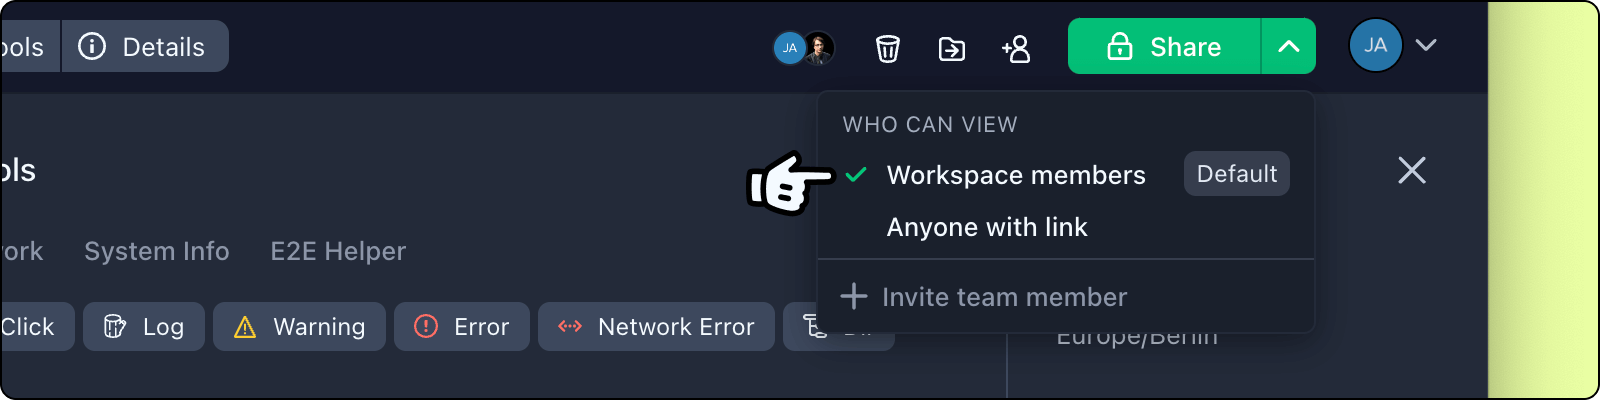 Set bug report access to team members only